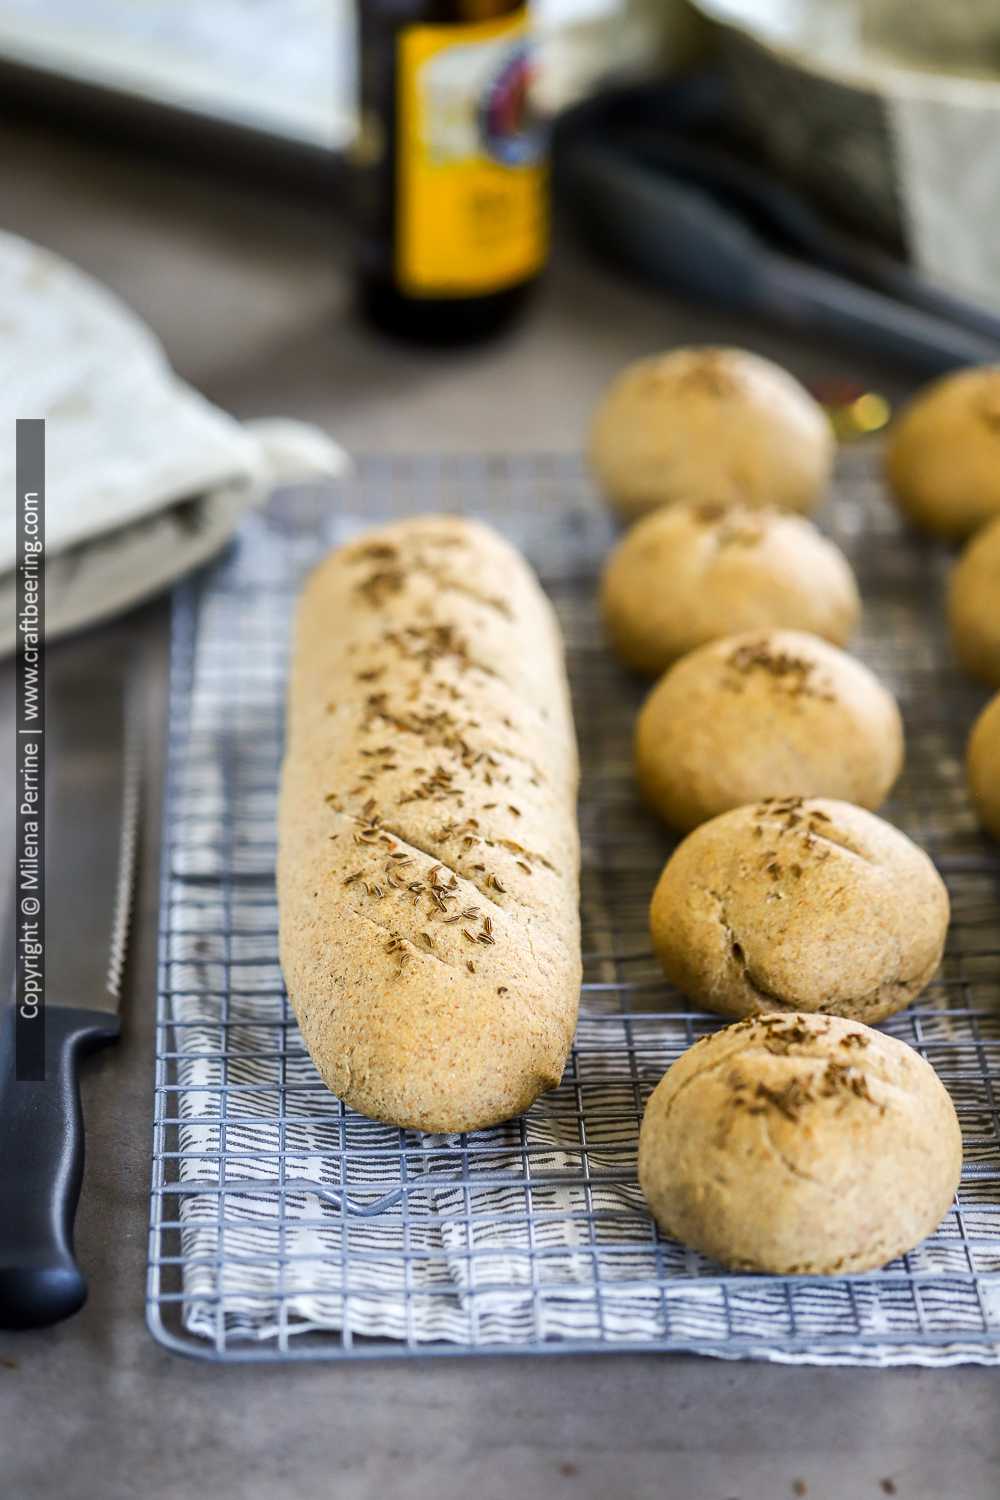 A loaf of beer bread with yeast next to bread rolls made with the same dough. 